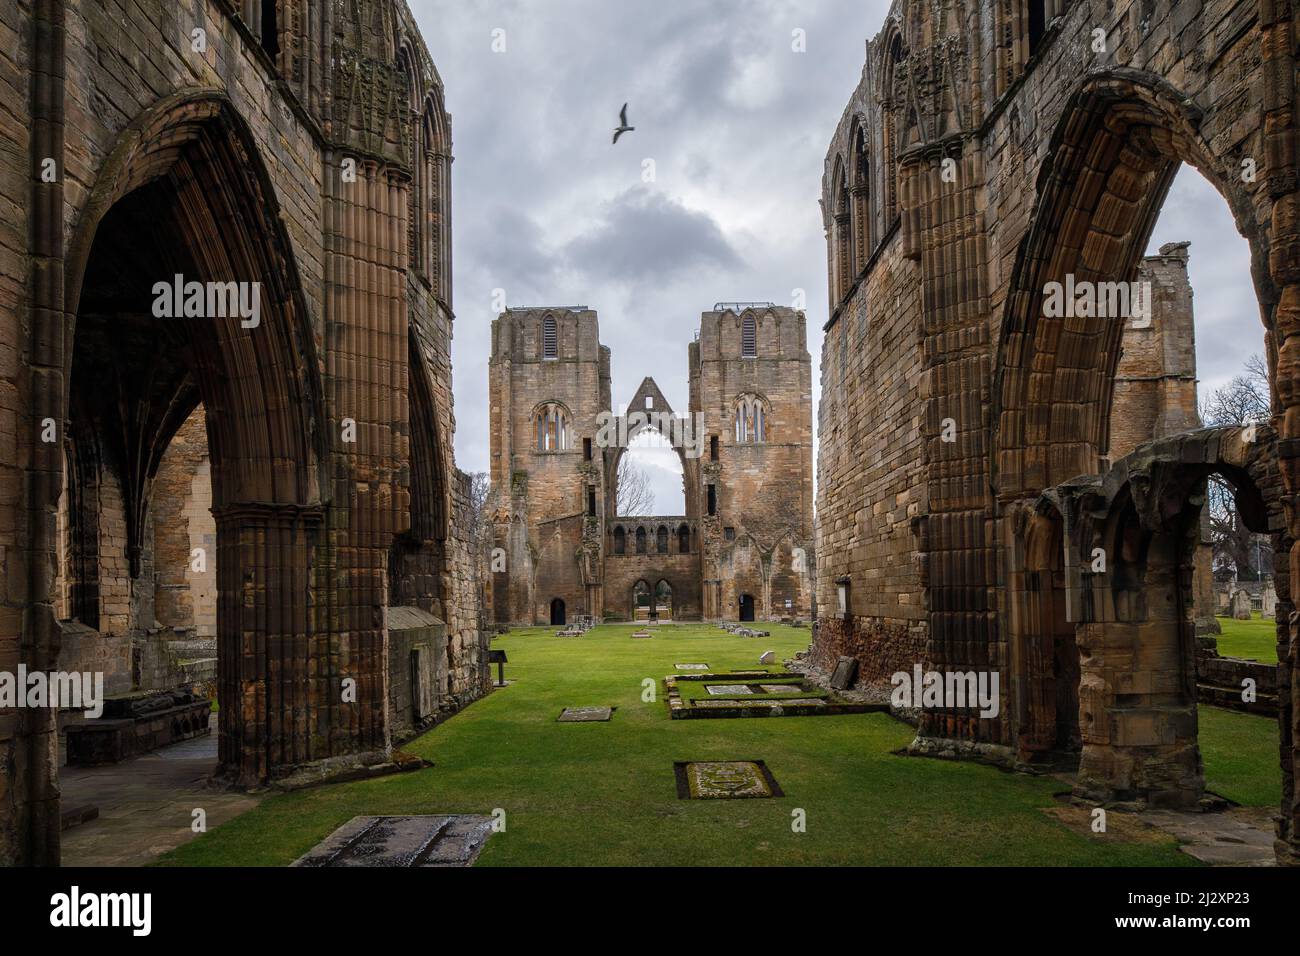 Elgin Cathedral, transept and beheaded spiers, Elgin Cathedral, church ruin, Elgin, Moray, Scotland, UK Stock Photo